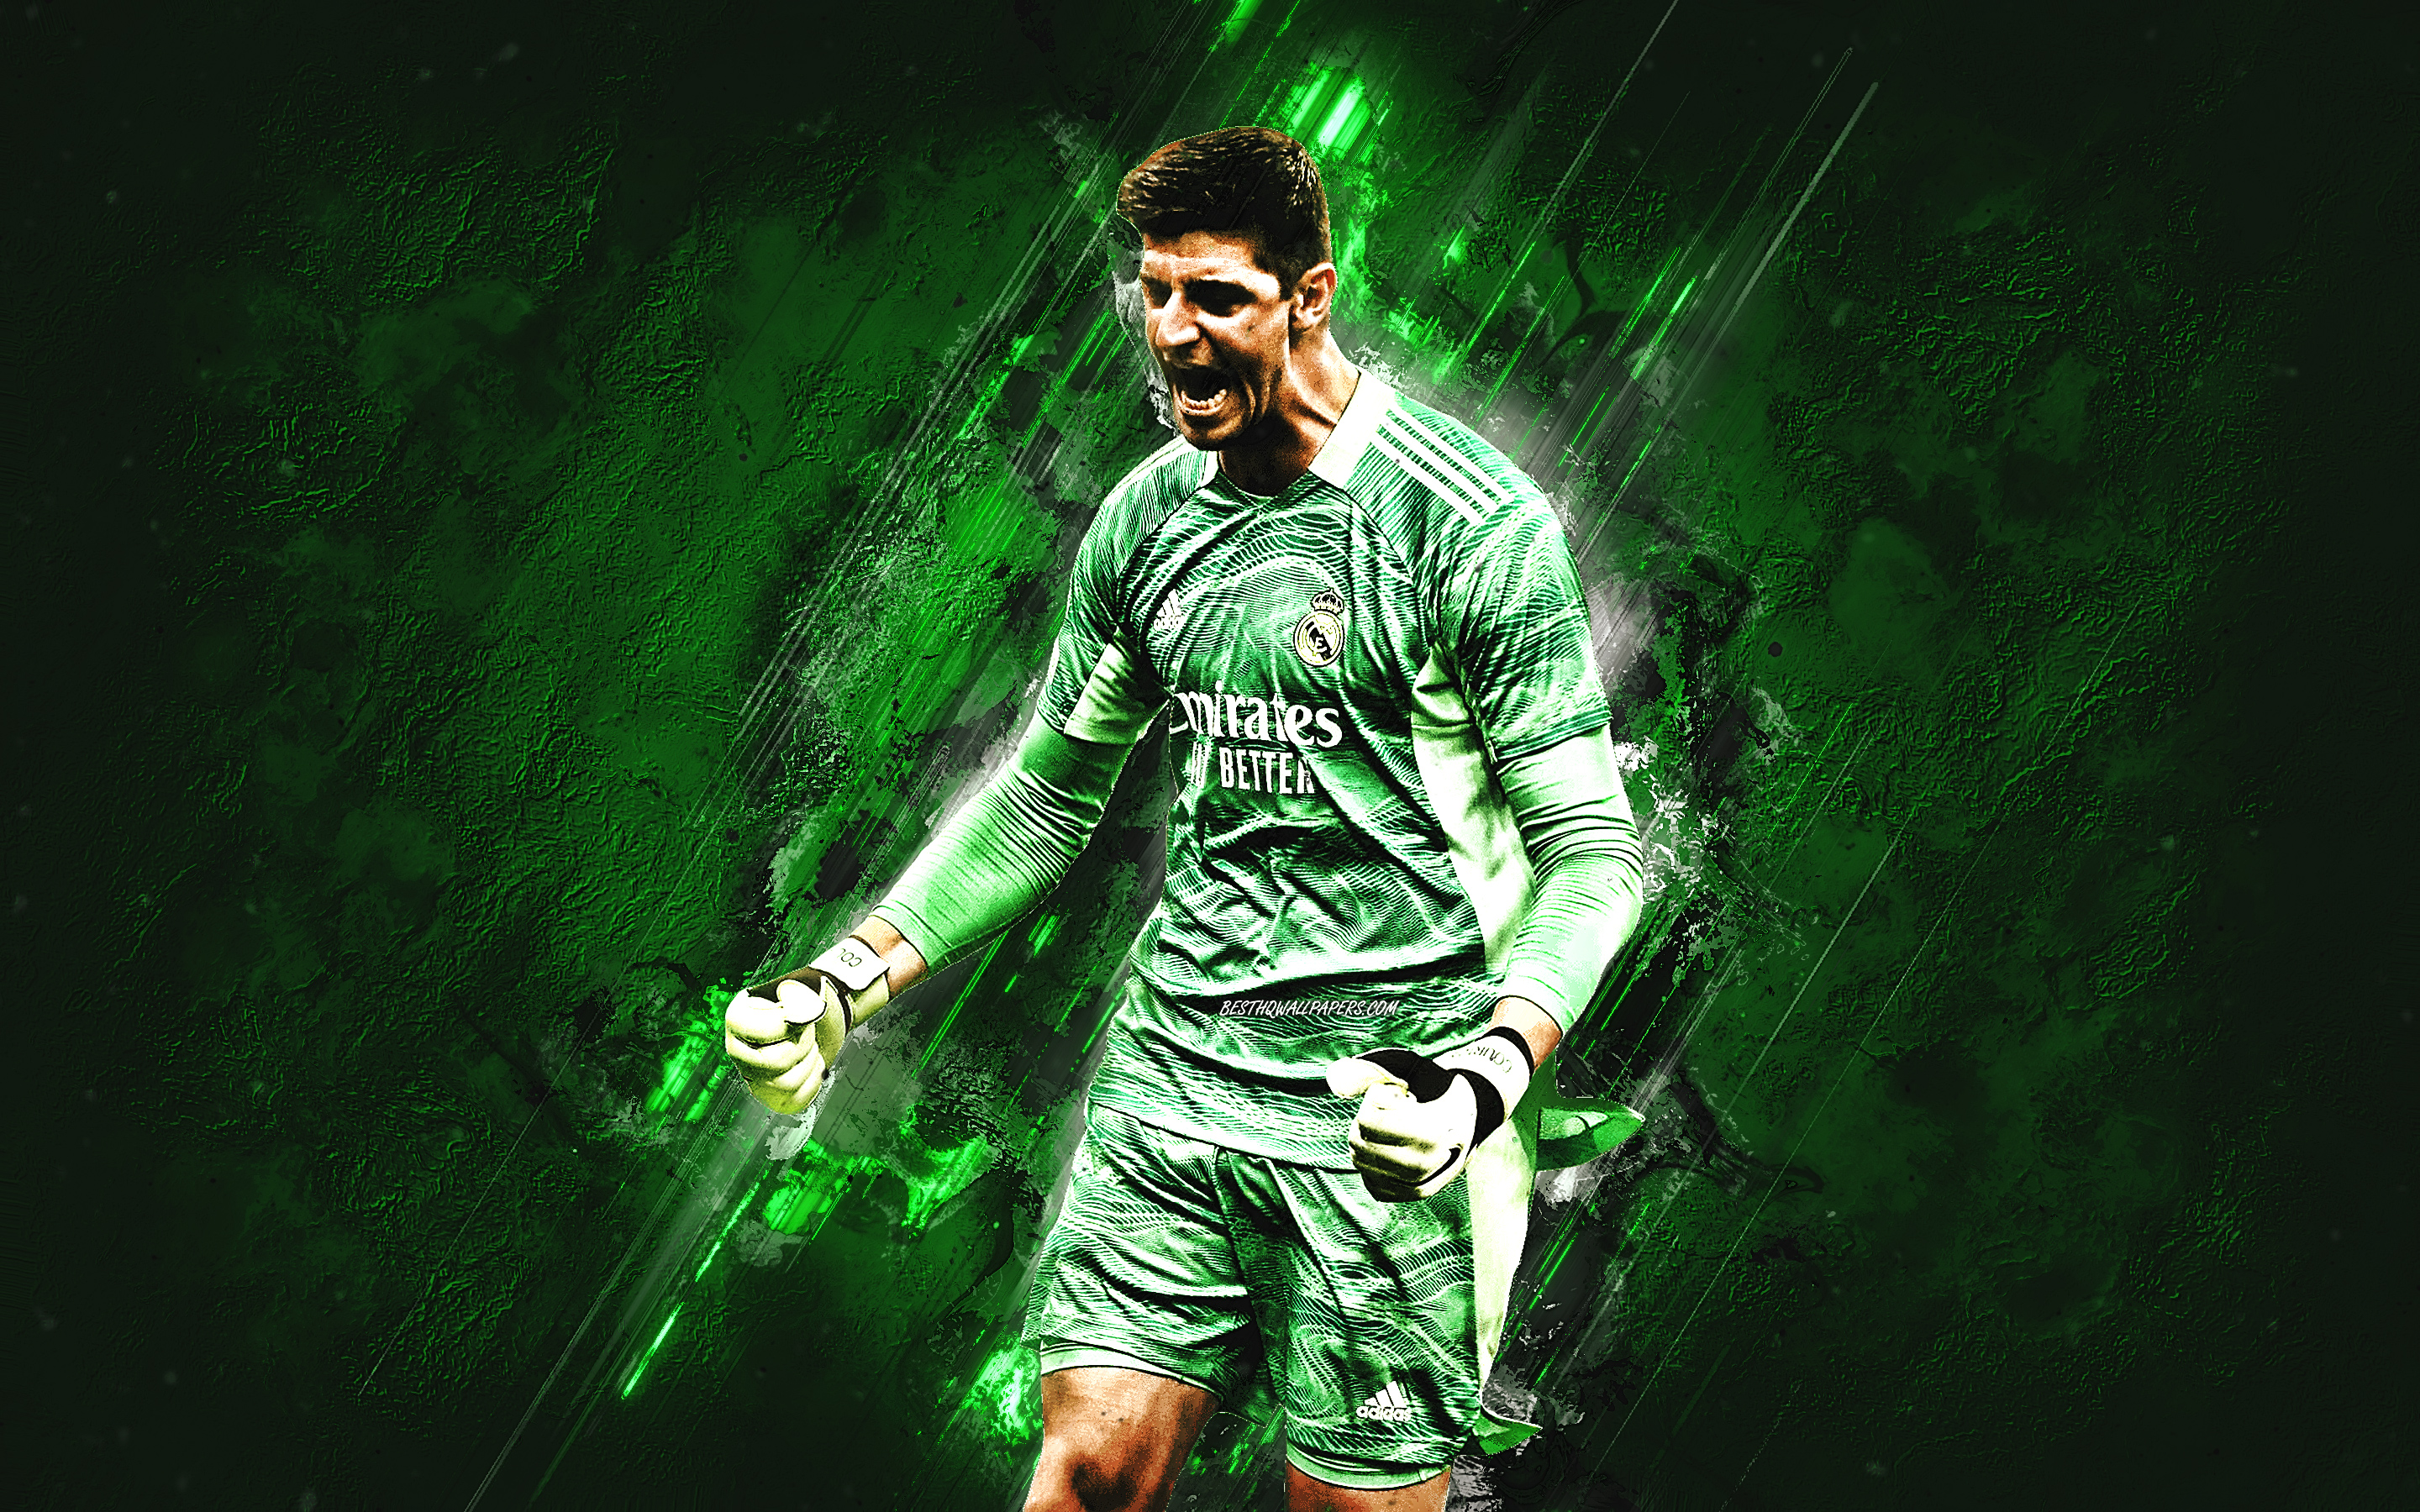 Download wallpaper Thibaut Courtois, Real Madrid, Belgian footballer, goalkeeper, green stone background, football, La Liga, Spain for desktop with resolution 2880x1800. High Quality HD picture wallpaper